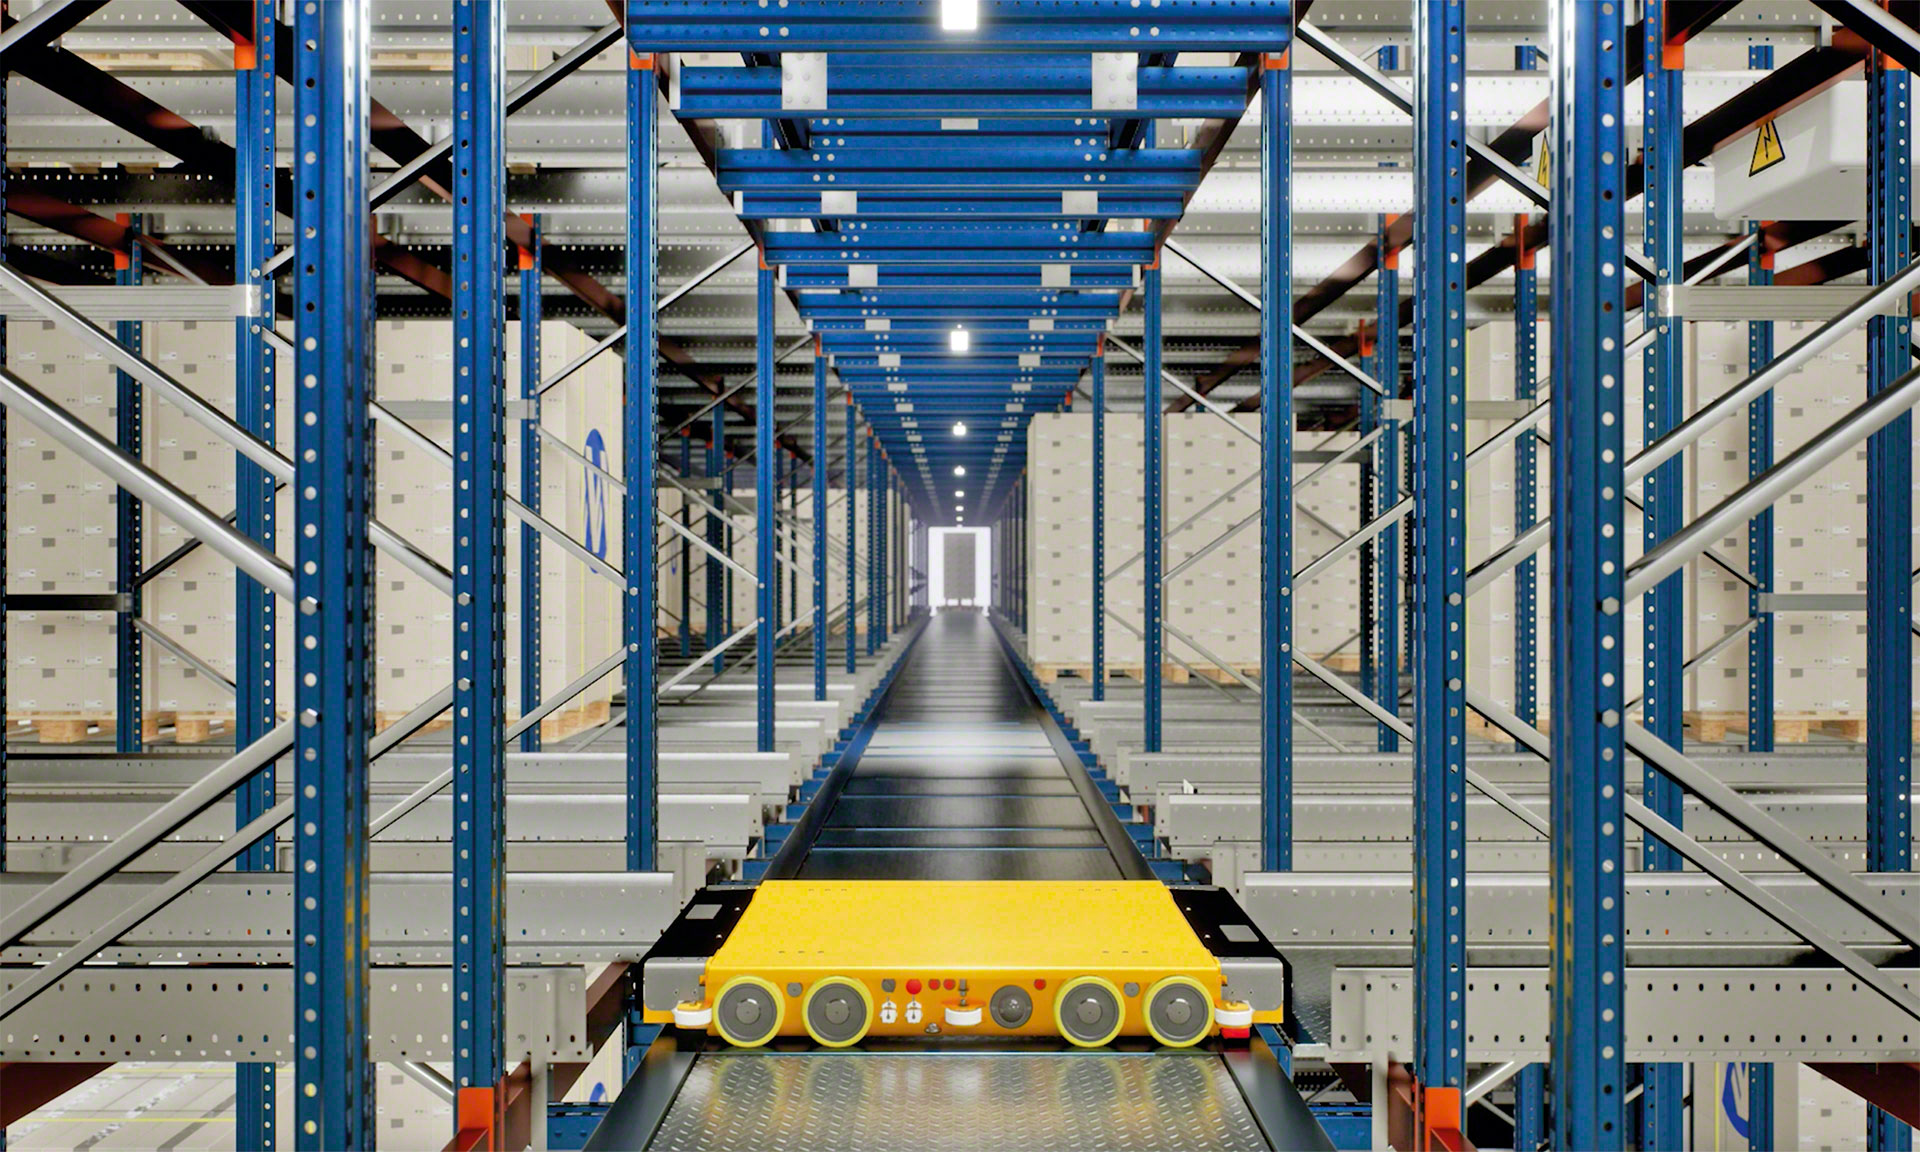 The 3D shuttle can navigate the aisles of the racking system autonomously